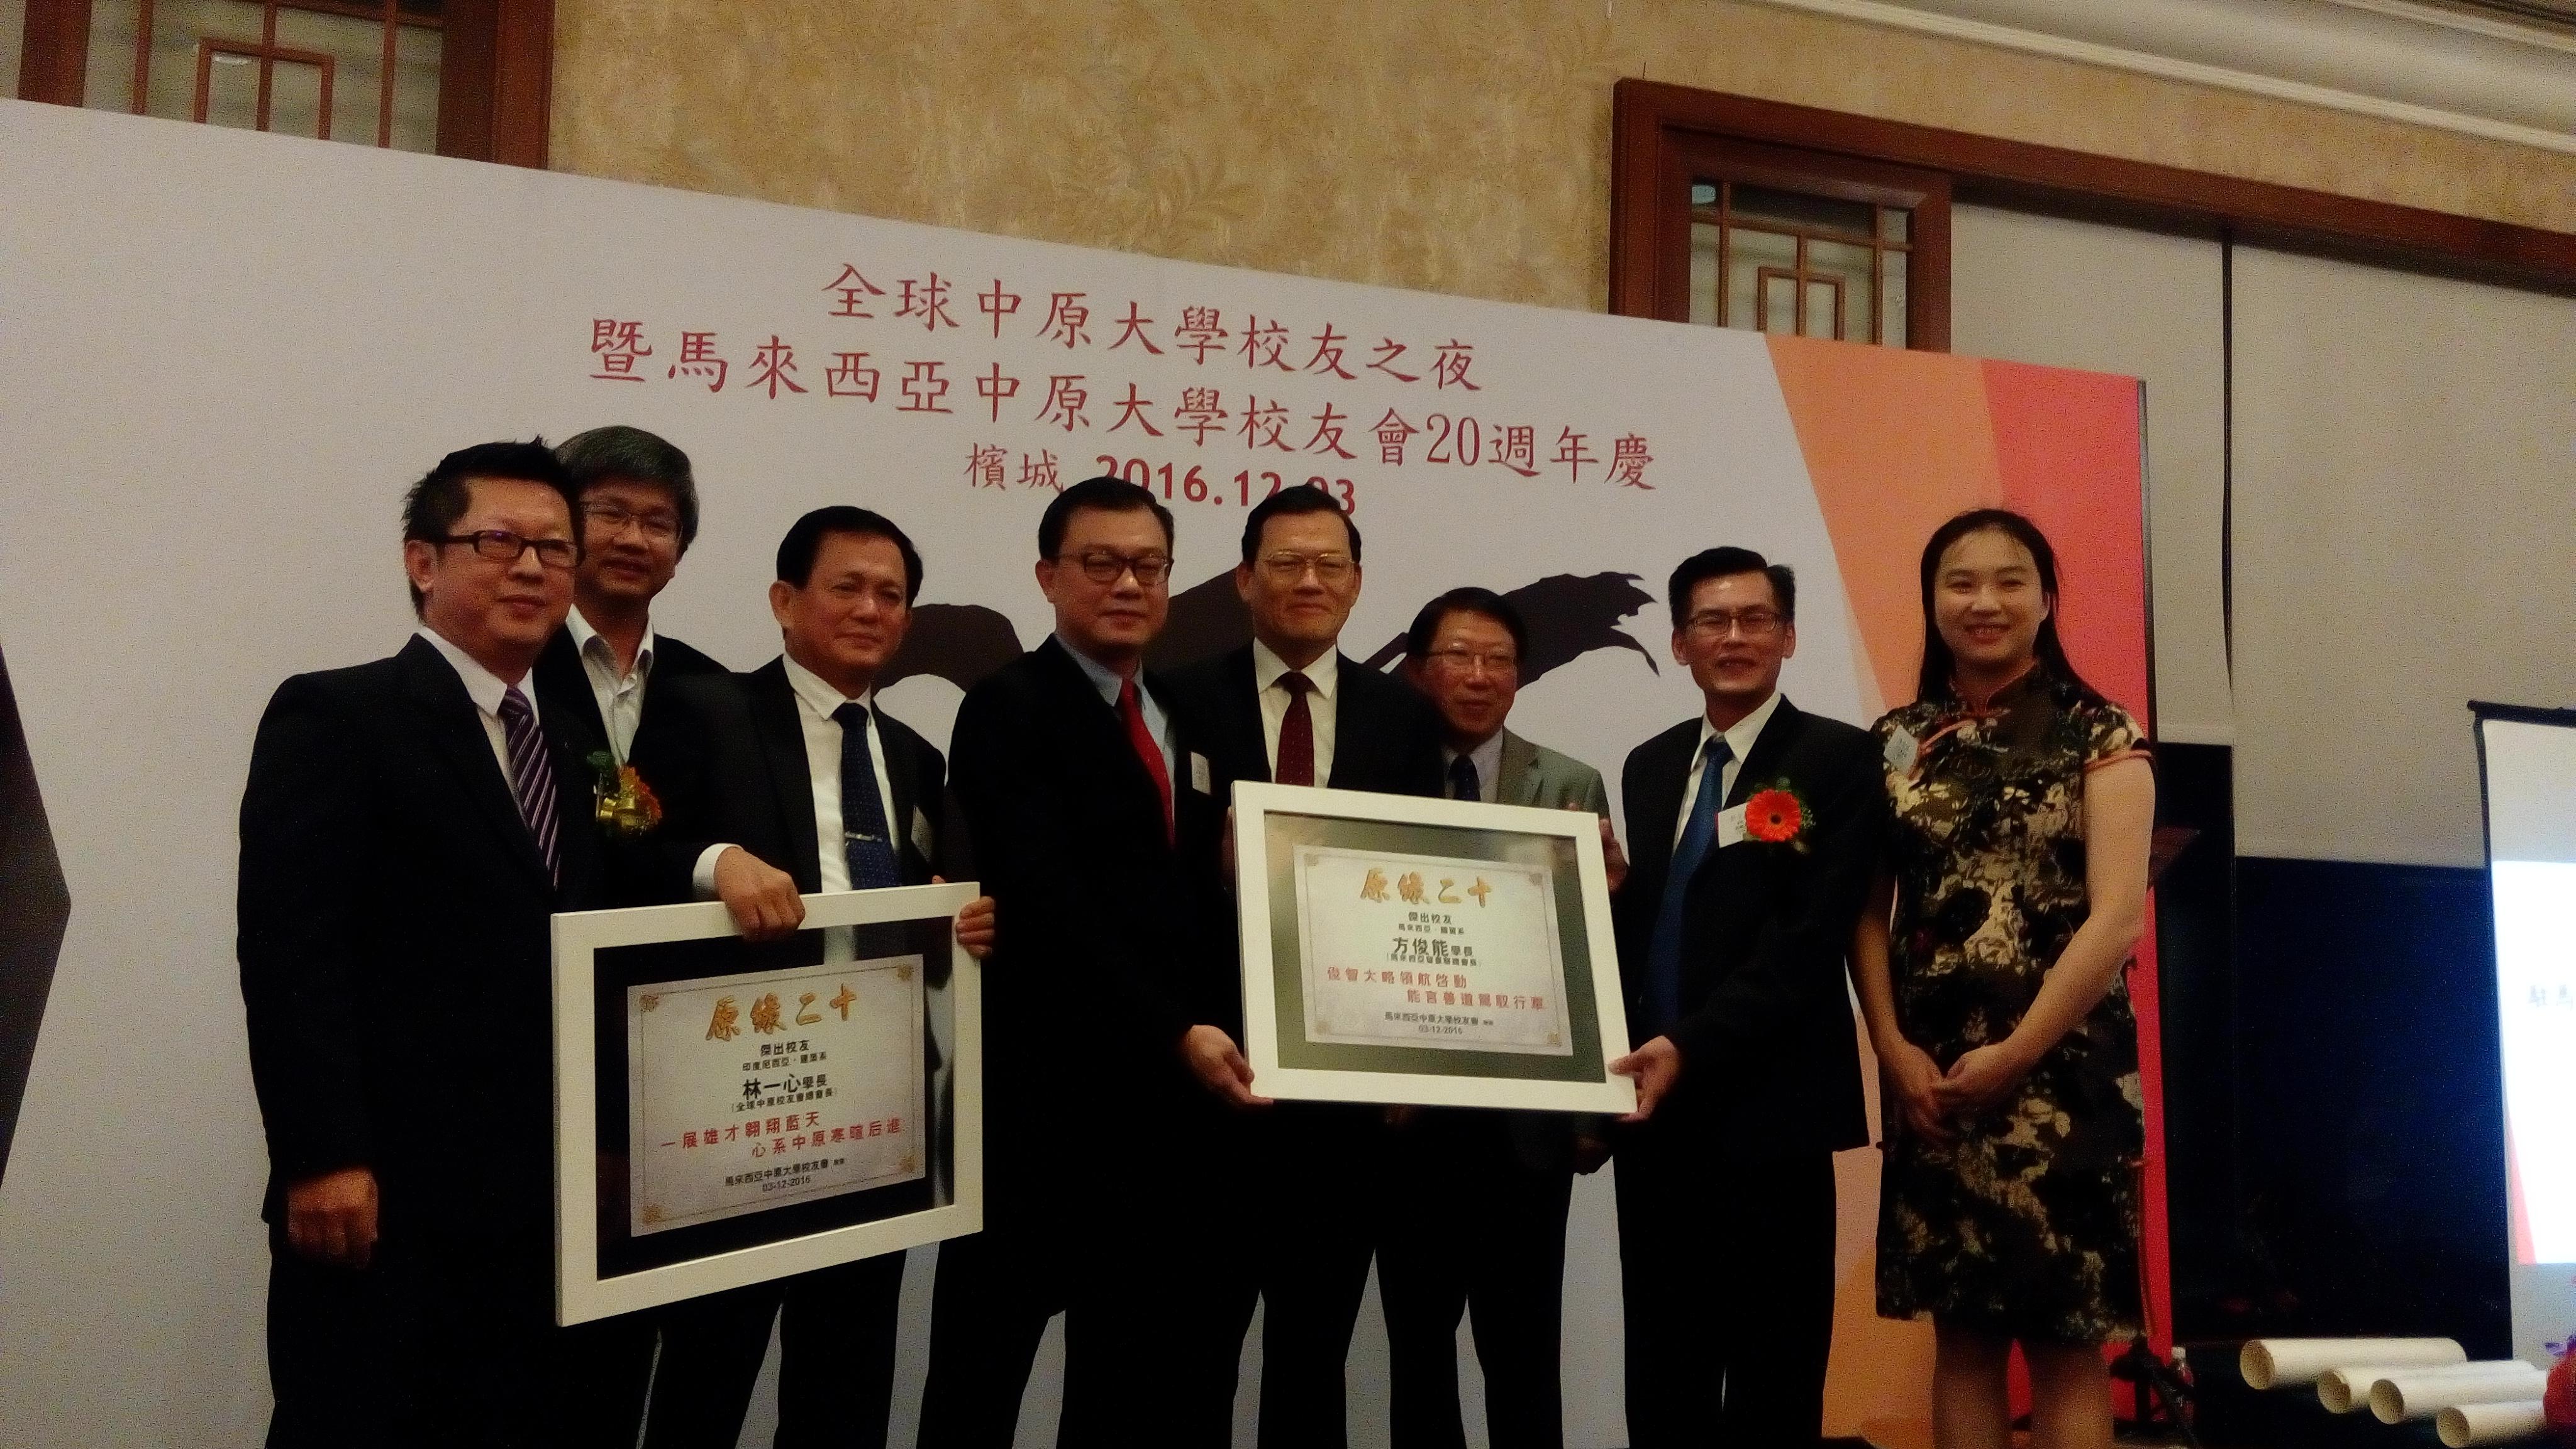 Representative Chang, James Chi-ping (fifth from left) attends the 20th anniversary of Global Alumni Association of Chung Yuan Christian University and Alumni Association of Chung Yuan Christian University in Malaysia.